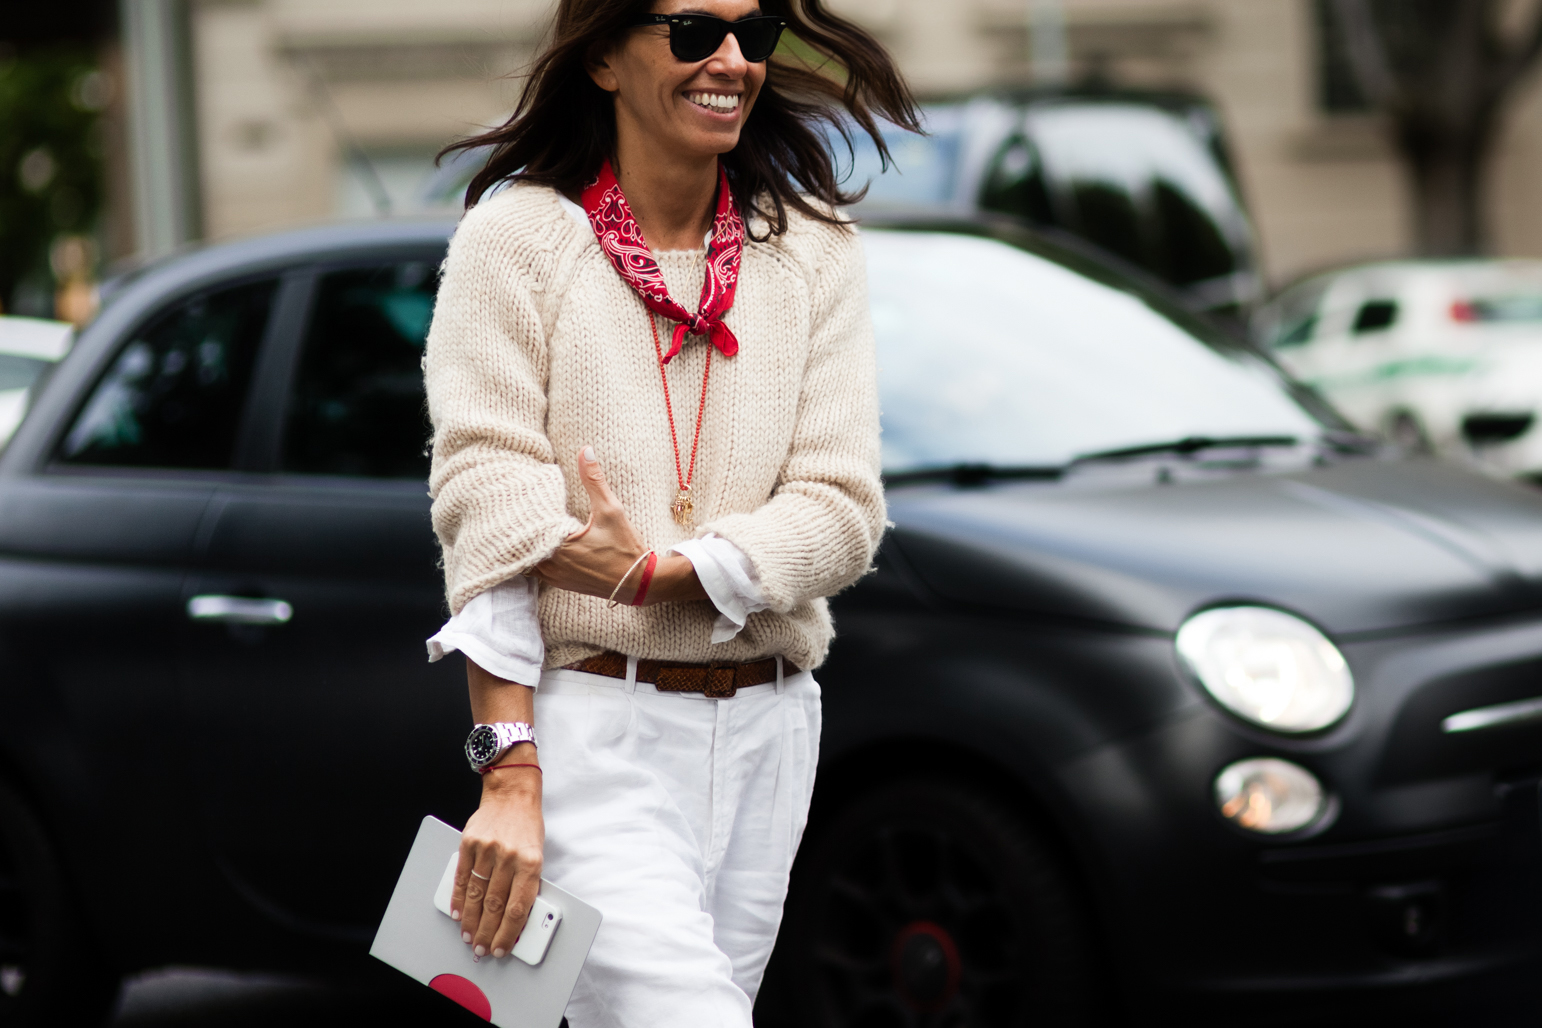 Viviana Volpicella wearing a white outfit and a red bandana scarf in Milan, Italy